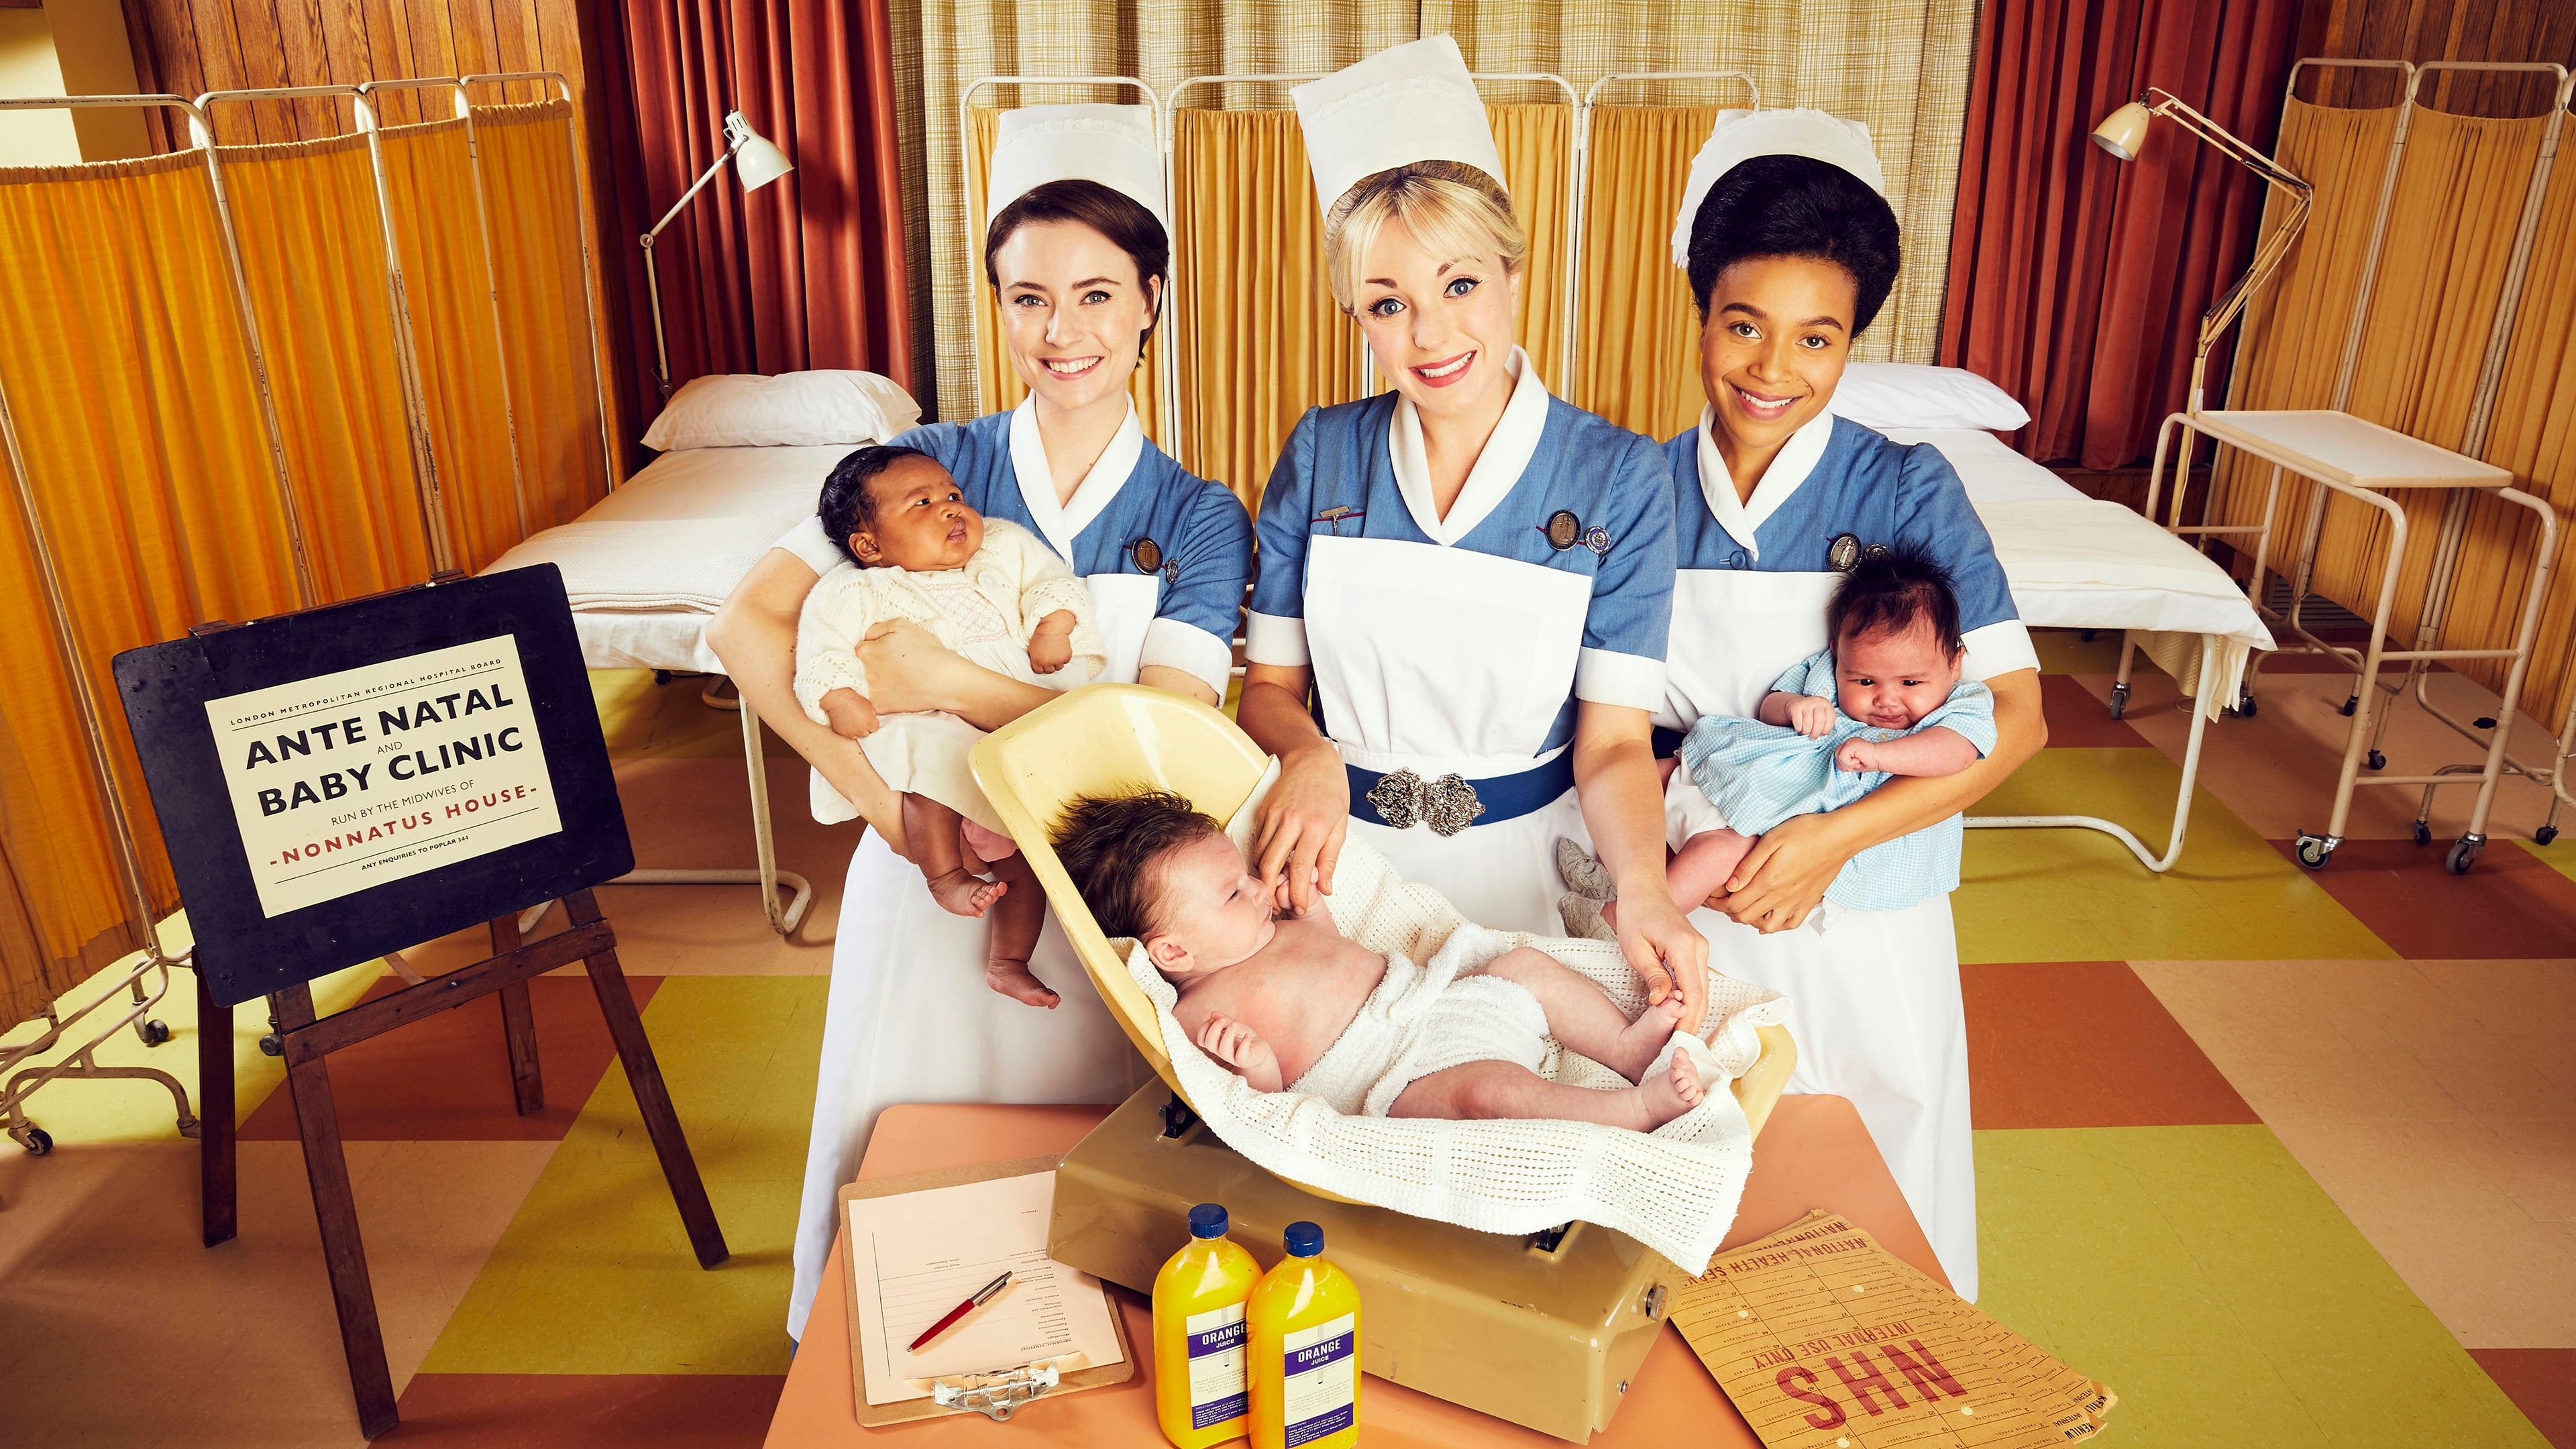 Call the Midwife, Soundtrack, Complete song list, TuneFind, 3840x2160 4K Desktop